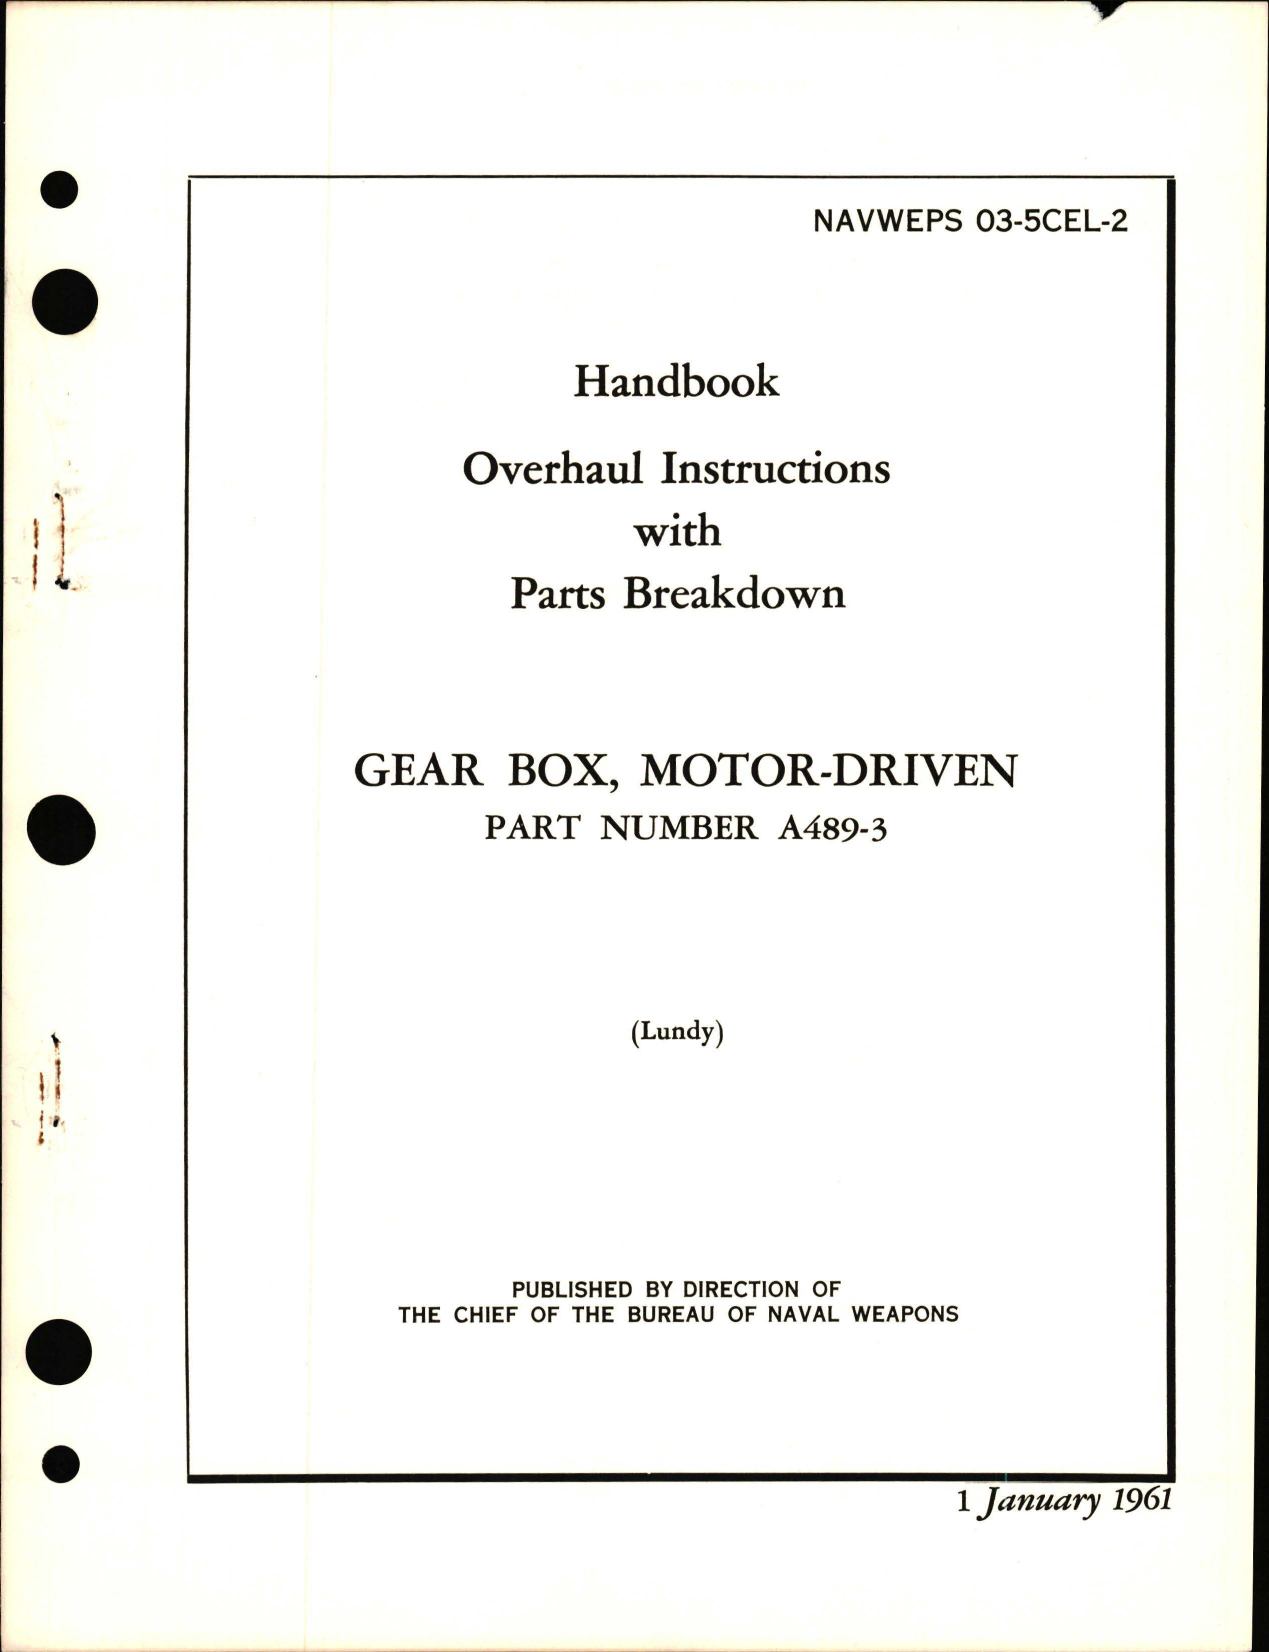 Sample page 1 from AirCorps Library document: Overhaul Instructions with Parts Breakdown for Gear Box, Motor Driven - Part A489-3